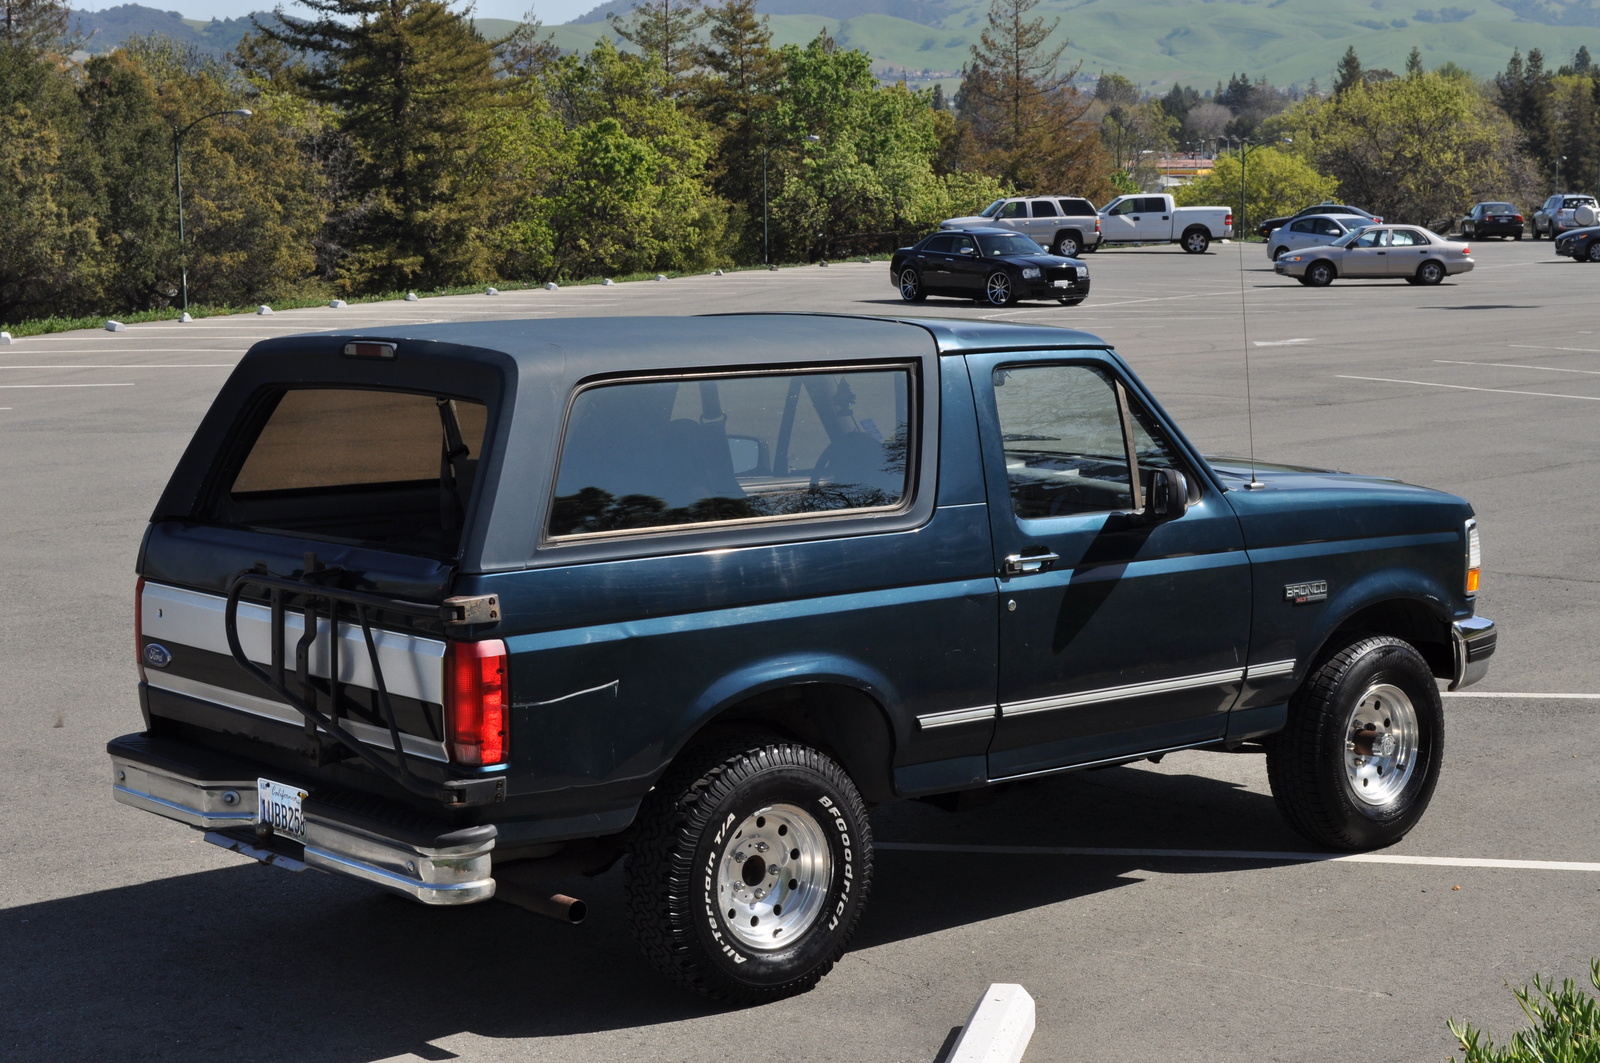 1995 Ford bronco reviews and specs #8